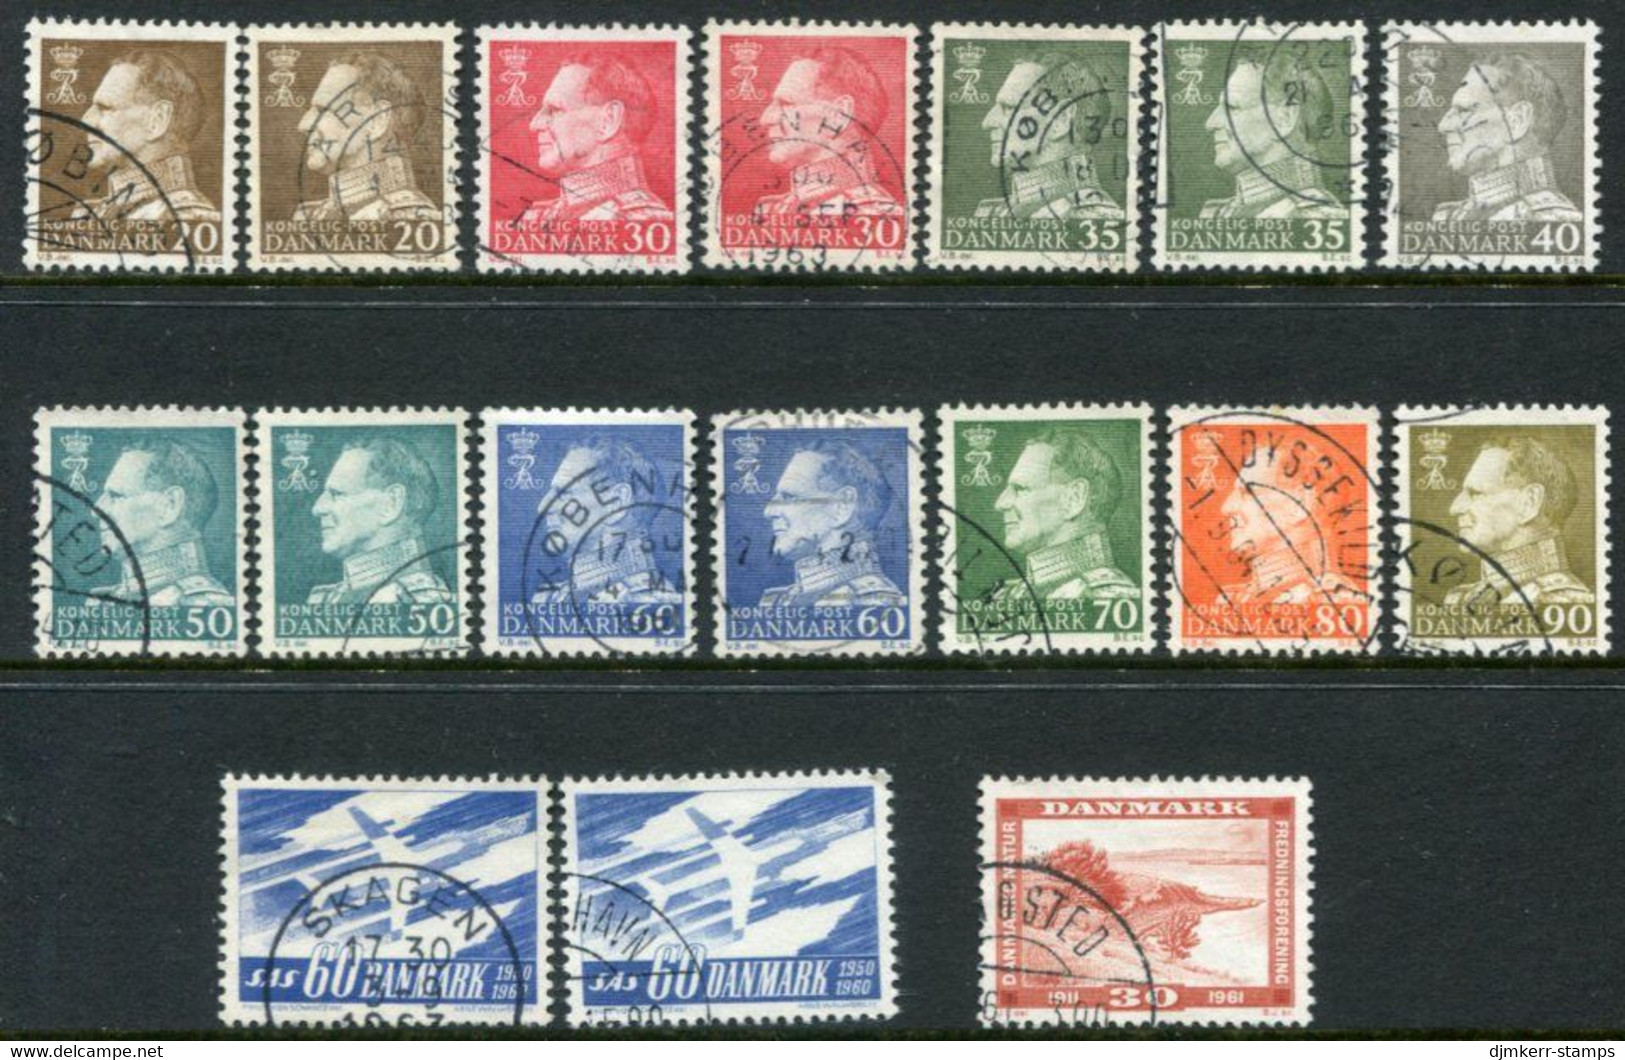 DENMARK 1961 Complete Issues With Ordinary And Fluorescent Papers, Used Michel 388-98 - Usati